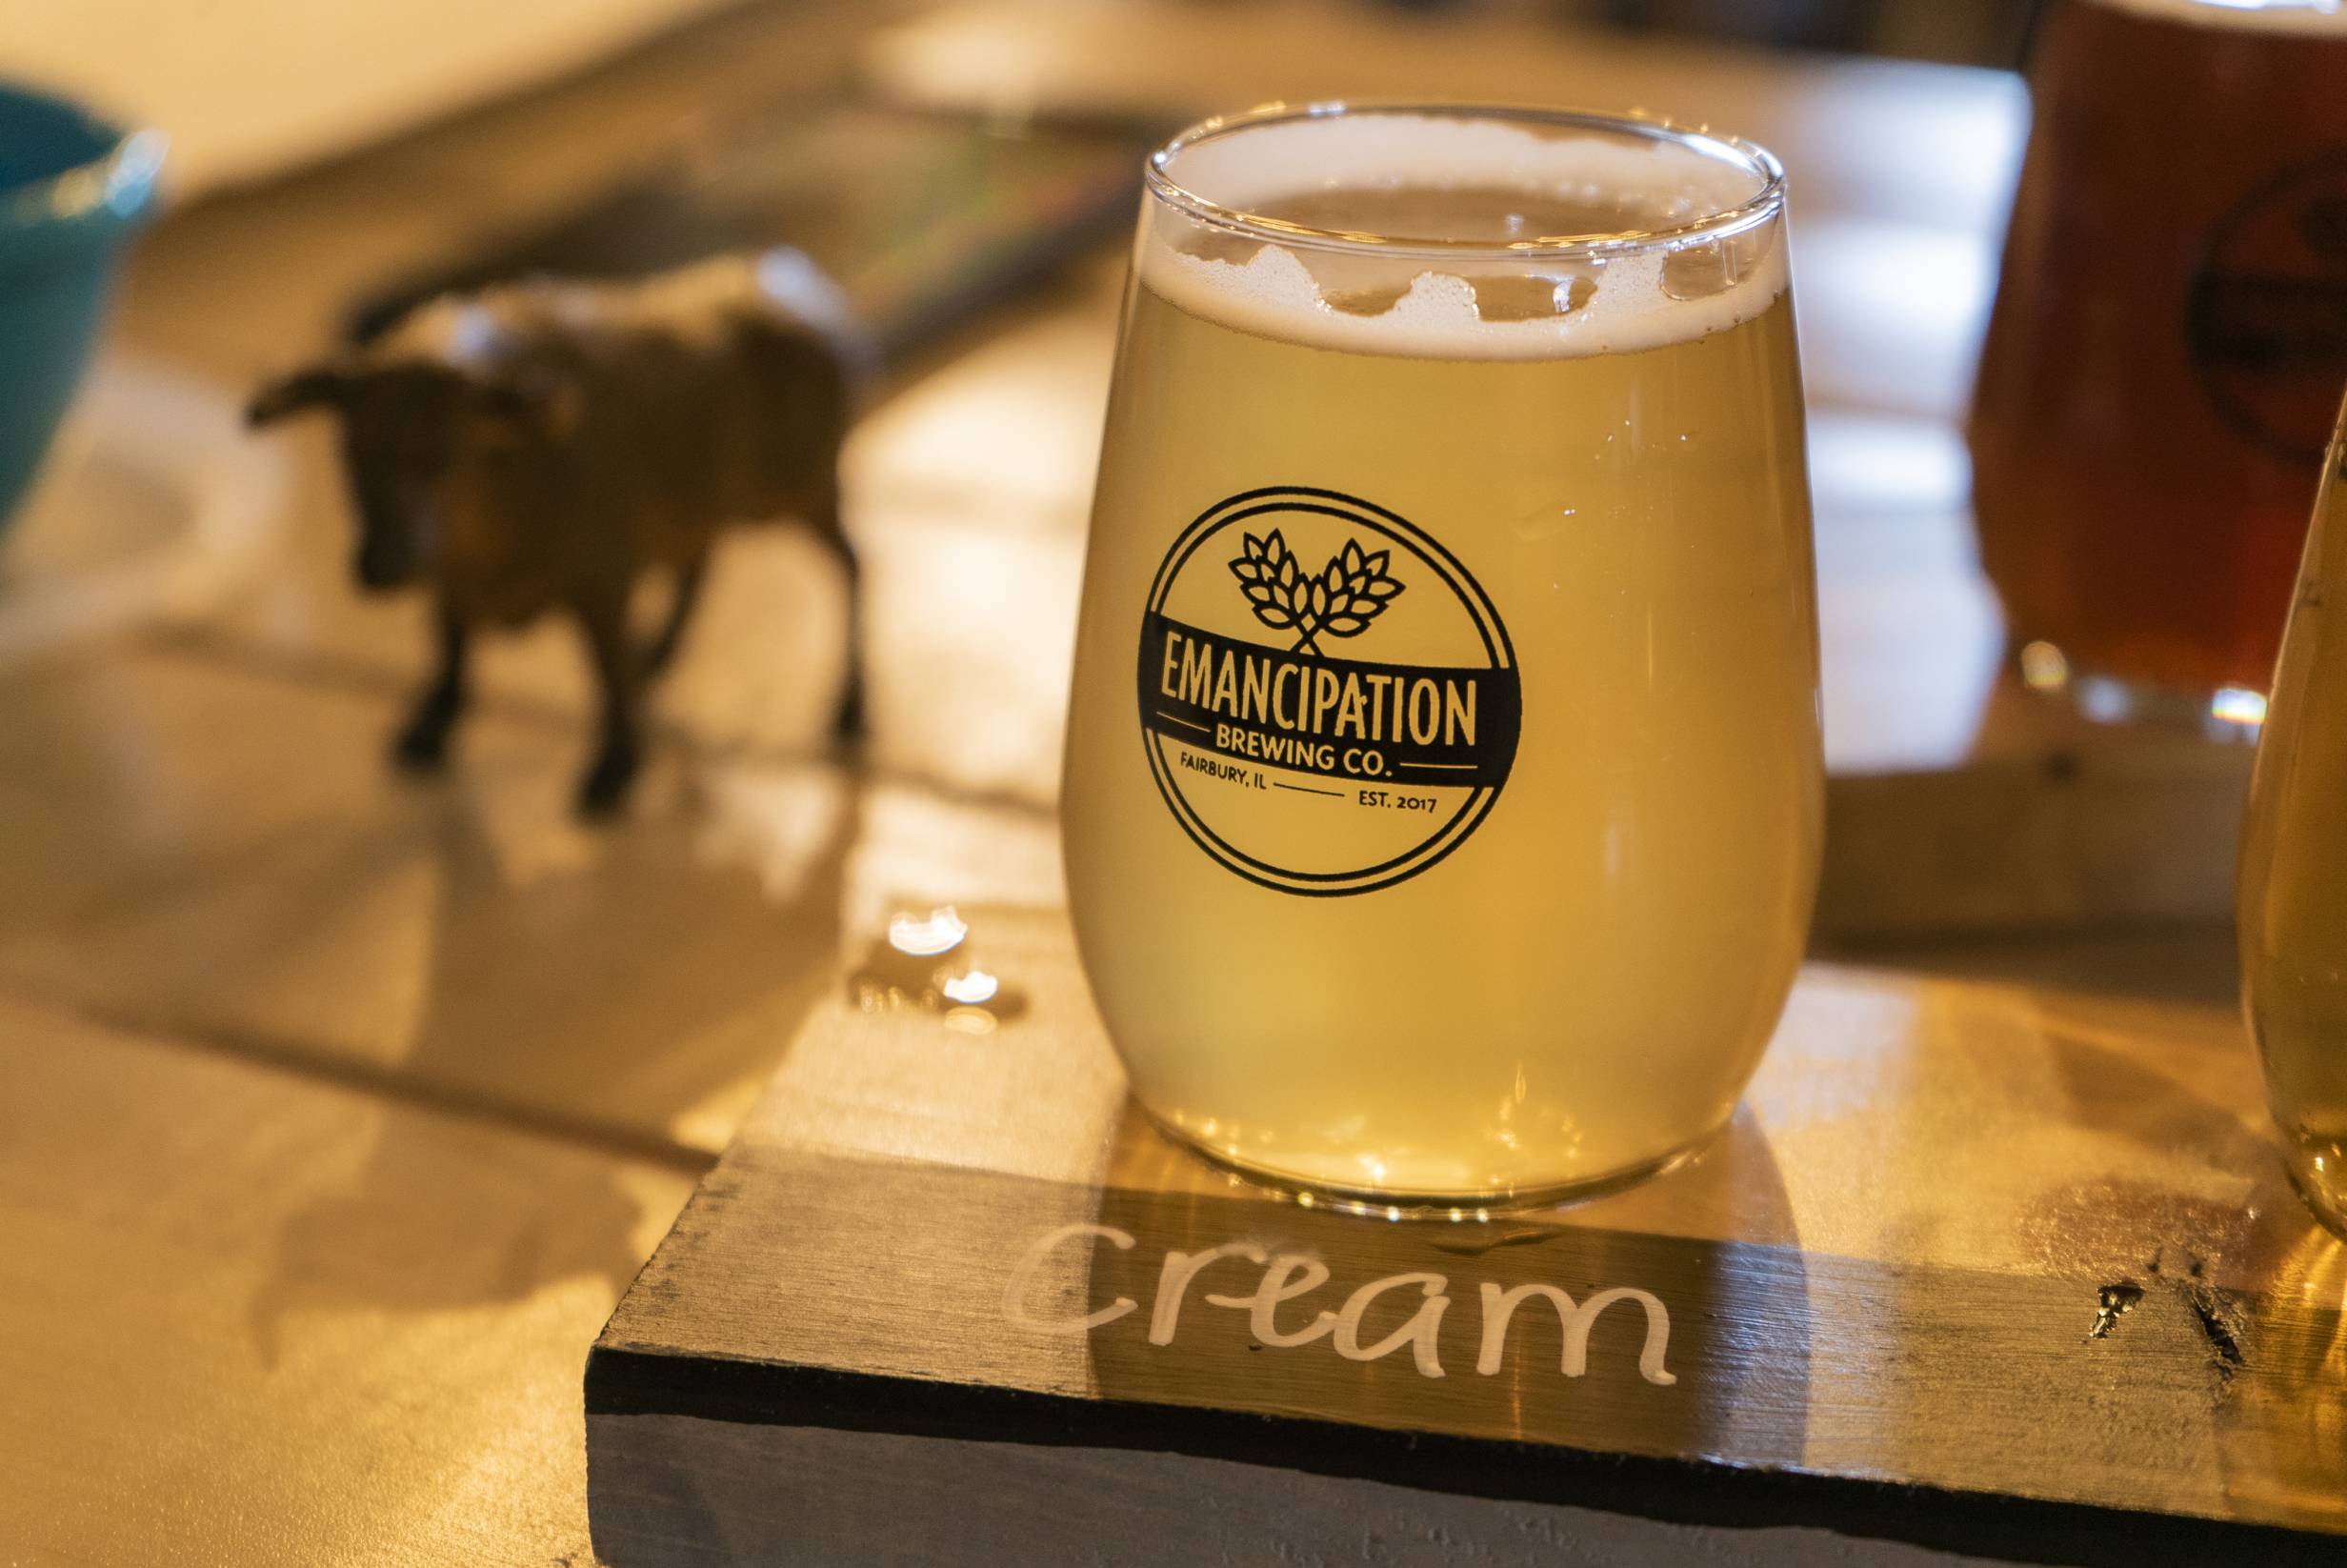 At Emancipation Brewing, a stemless tumbler glass with the brewery's logo on the front is filled with a light yellow beer. It sits on a wood serving tray, and the tray reads 